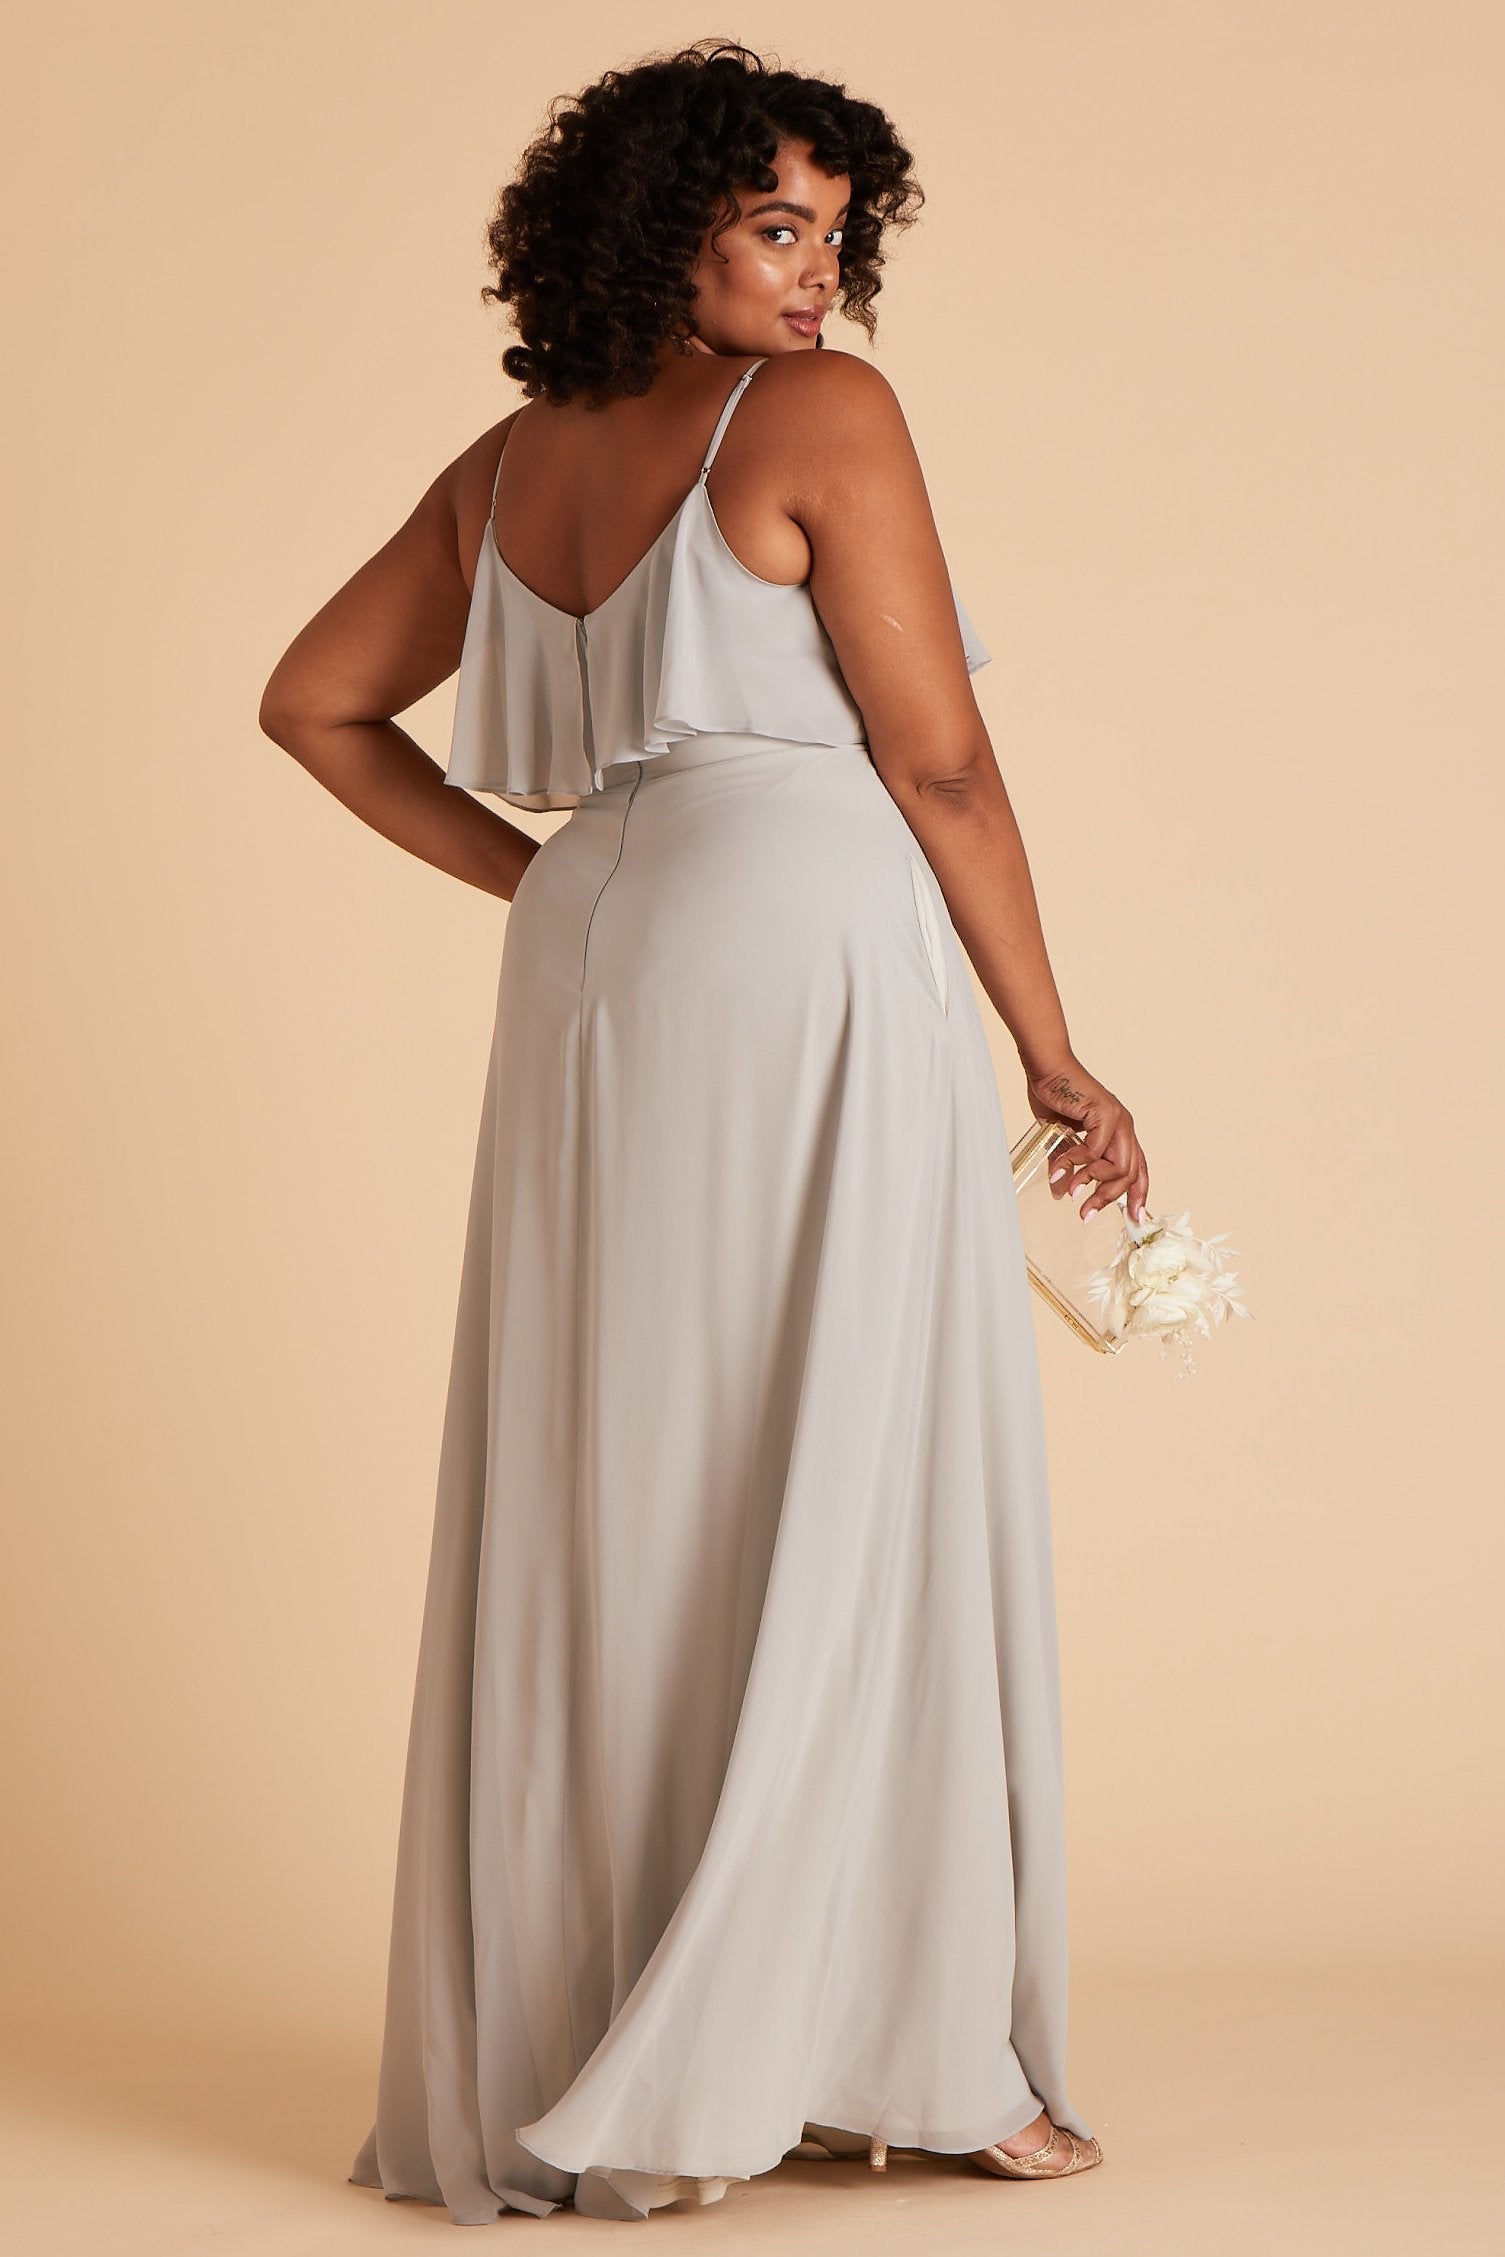 Jane convertible plus size bridesmaid dress in dove gray chiffon by Birdy Grey, back view